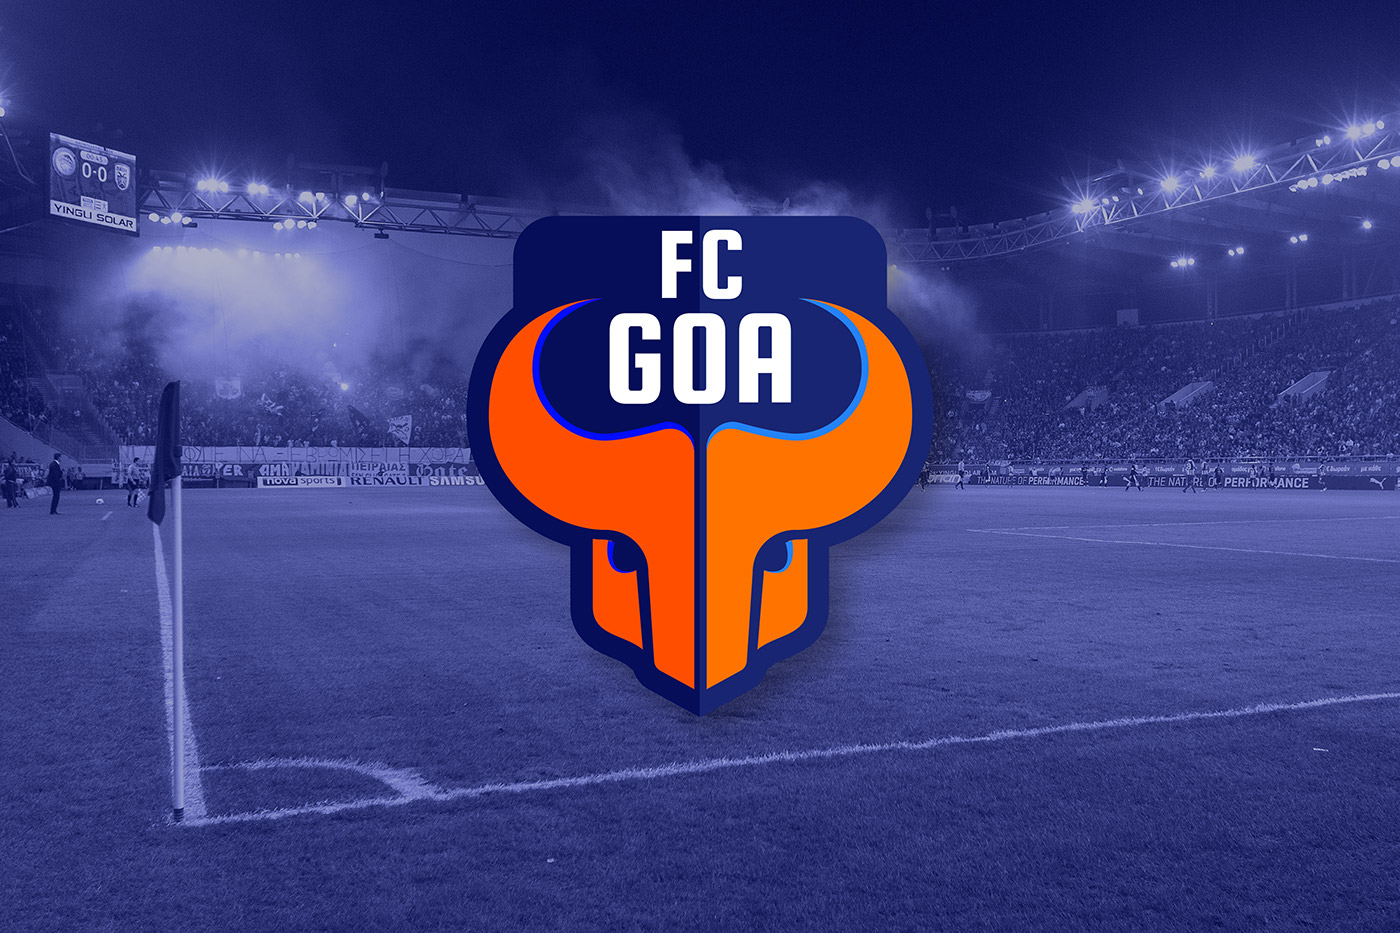 FC Goa Squad, Players, Stadium, Kits, and much more